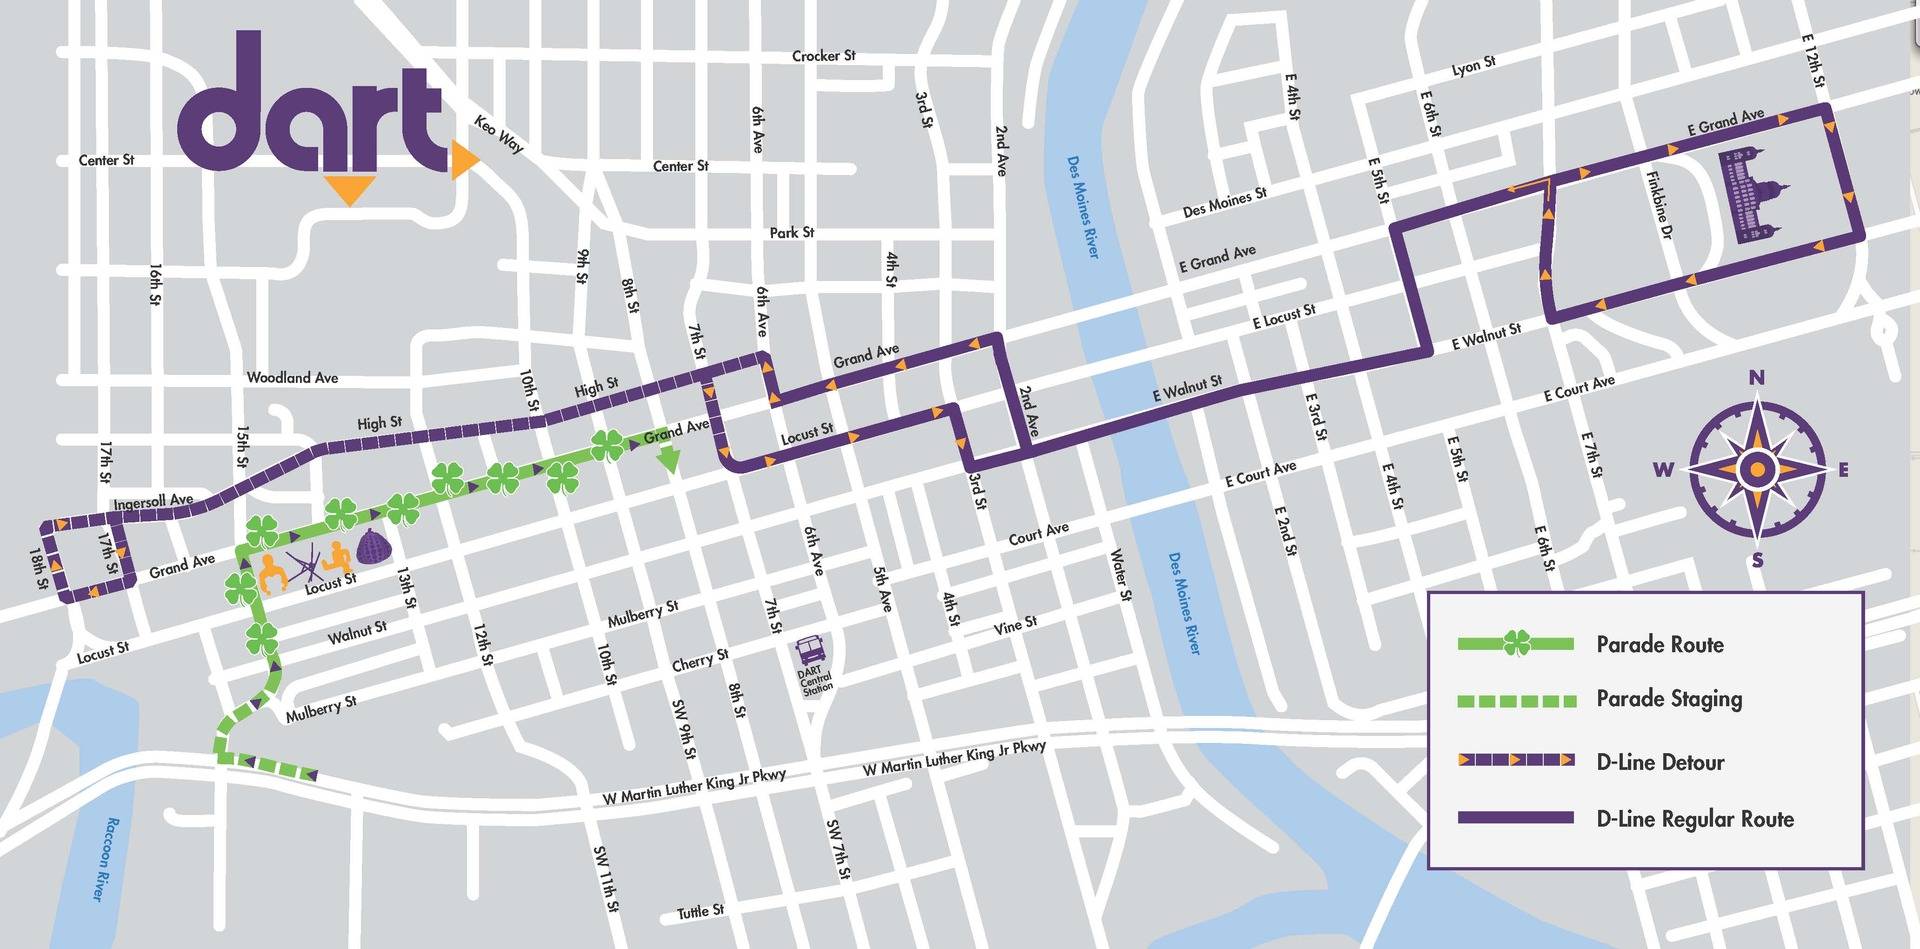 How to get to the St. Patrick's Day Parade in downtown Des Moines